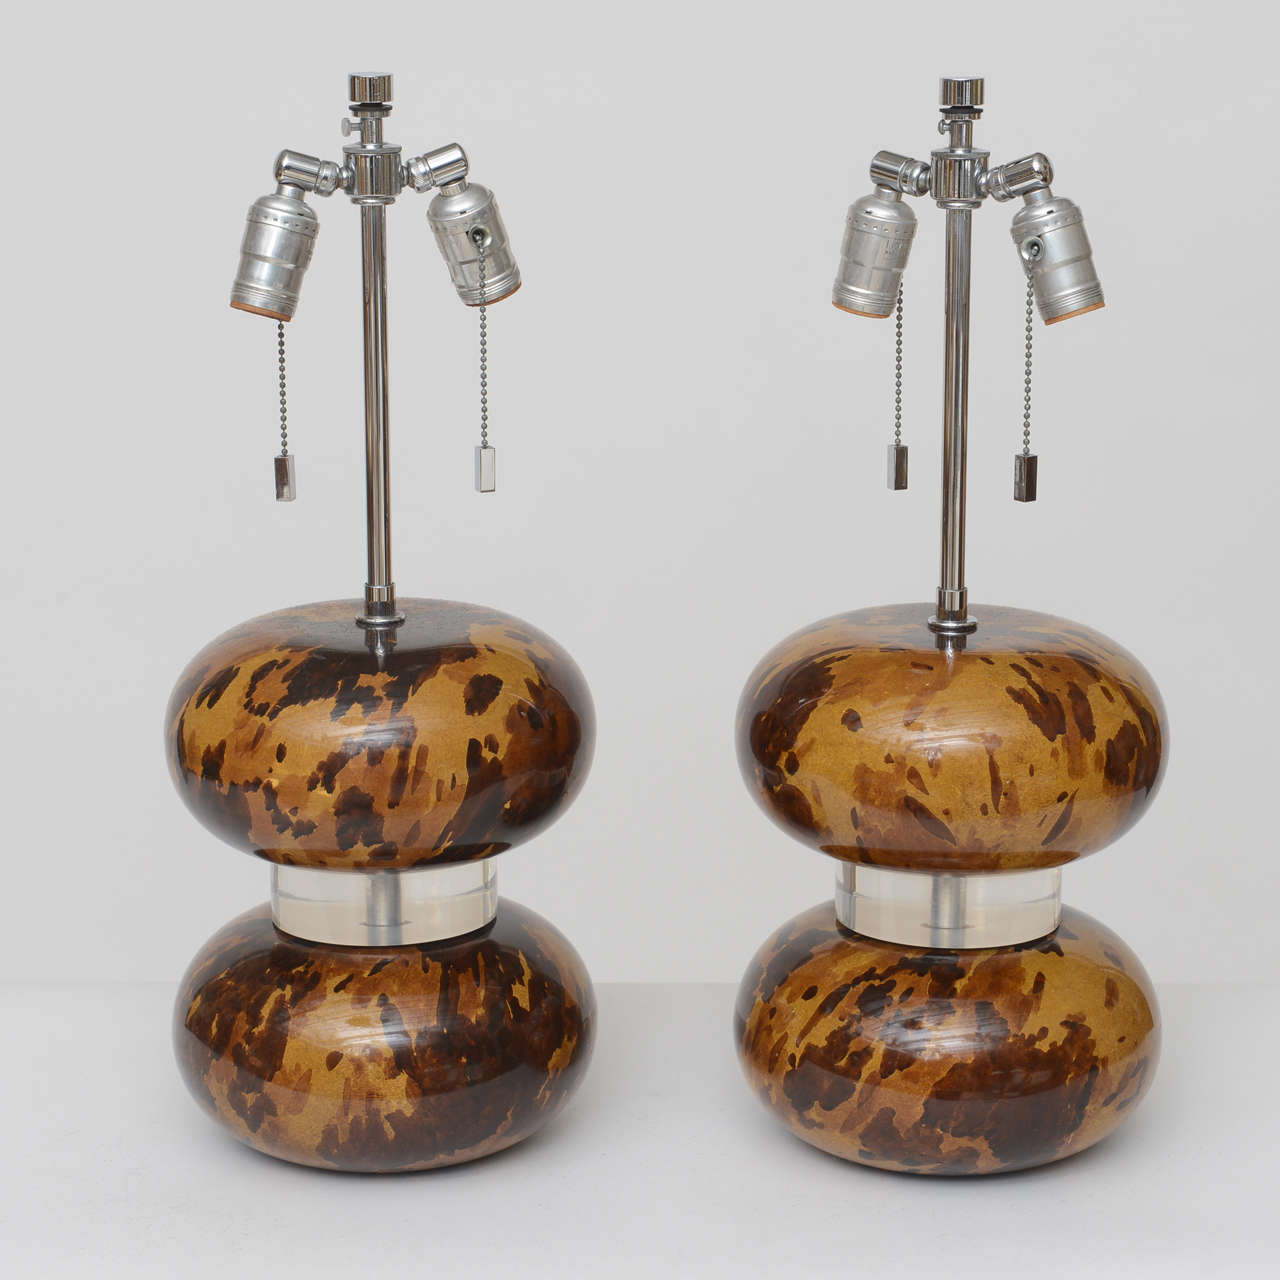 Gorgeous pair of Karl Springer table lamps, circa 1980. Distended orbs with faux tortoise shell finish are separated by a thick Lucite disk. All original chromed hardware. Adjustable harp starts at 22